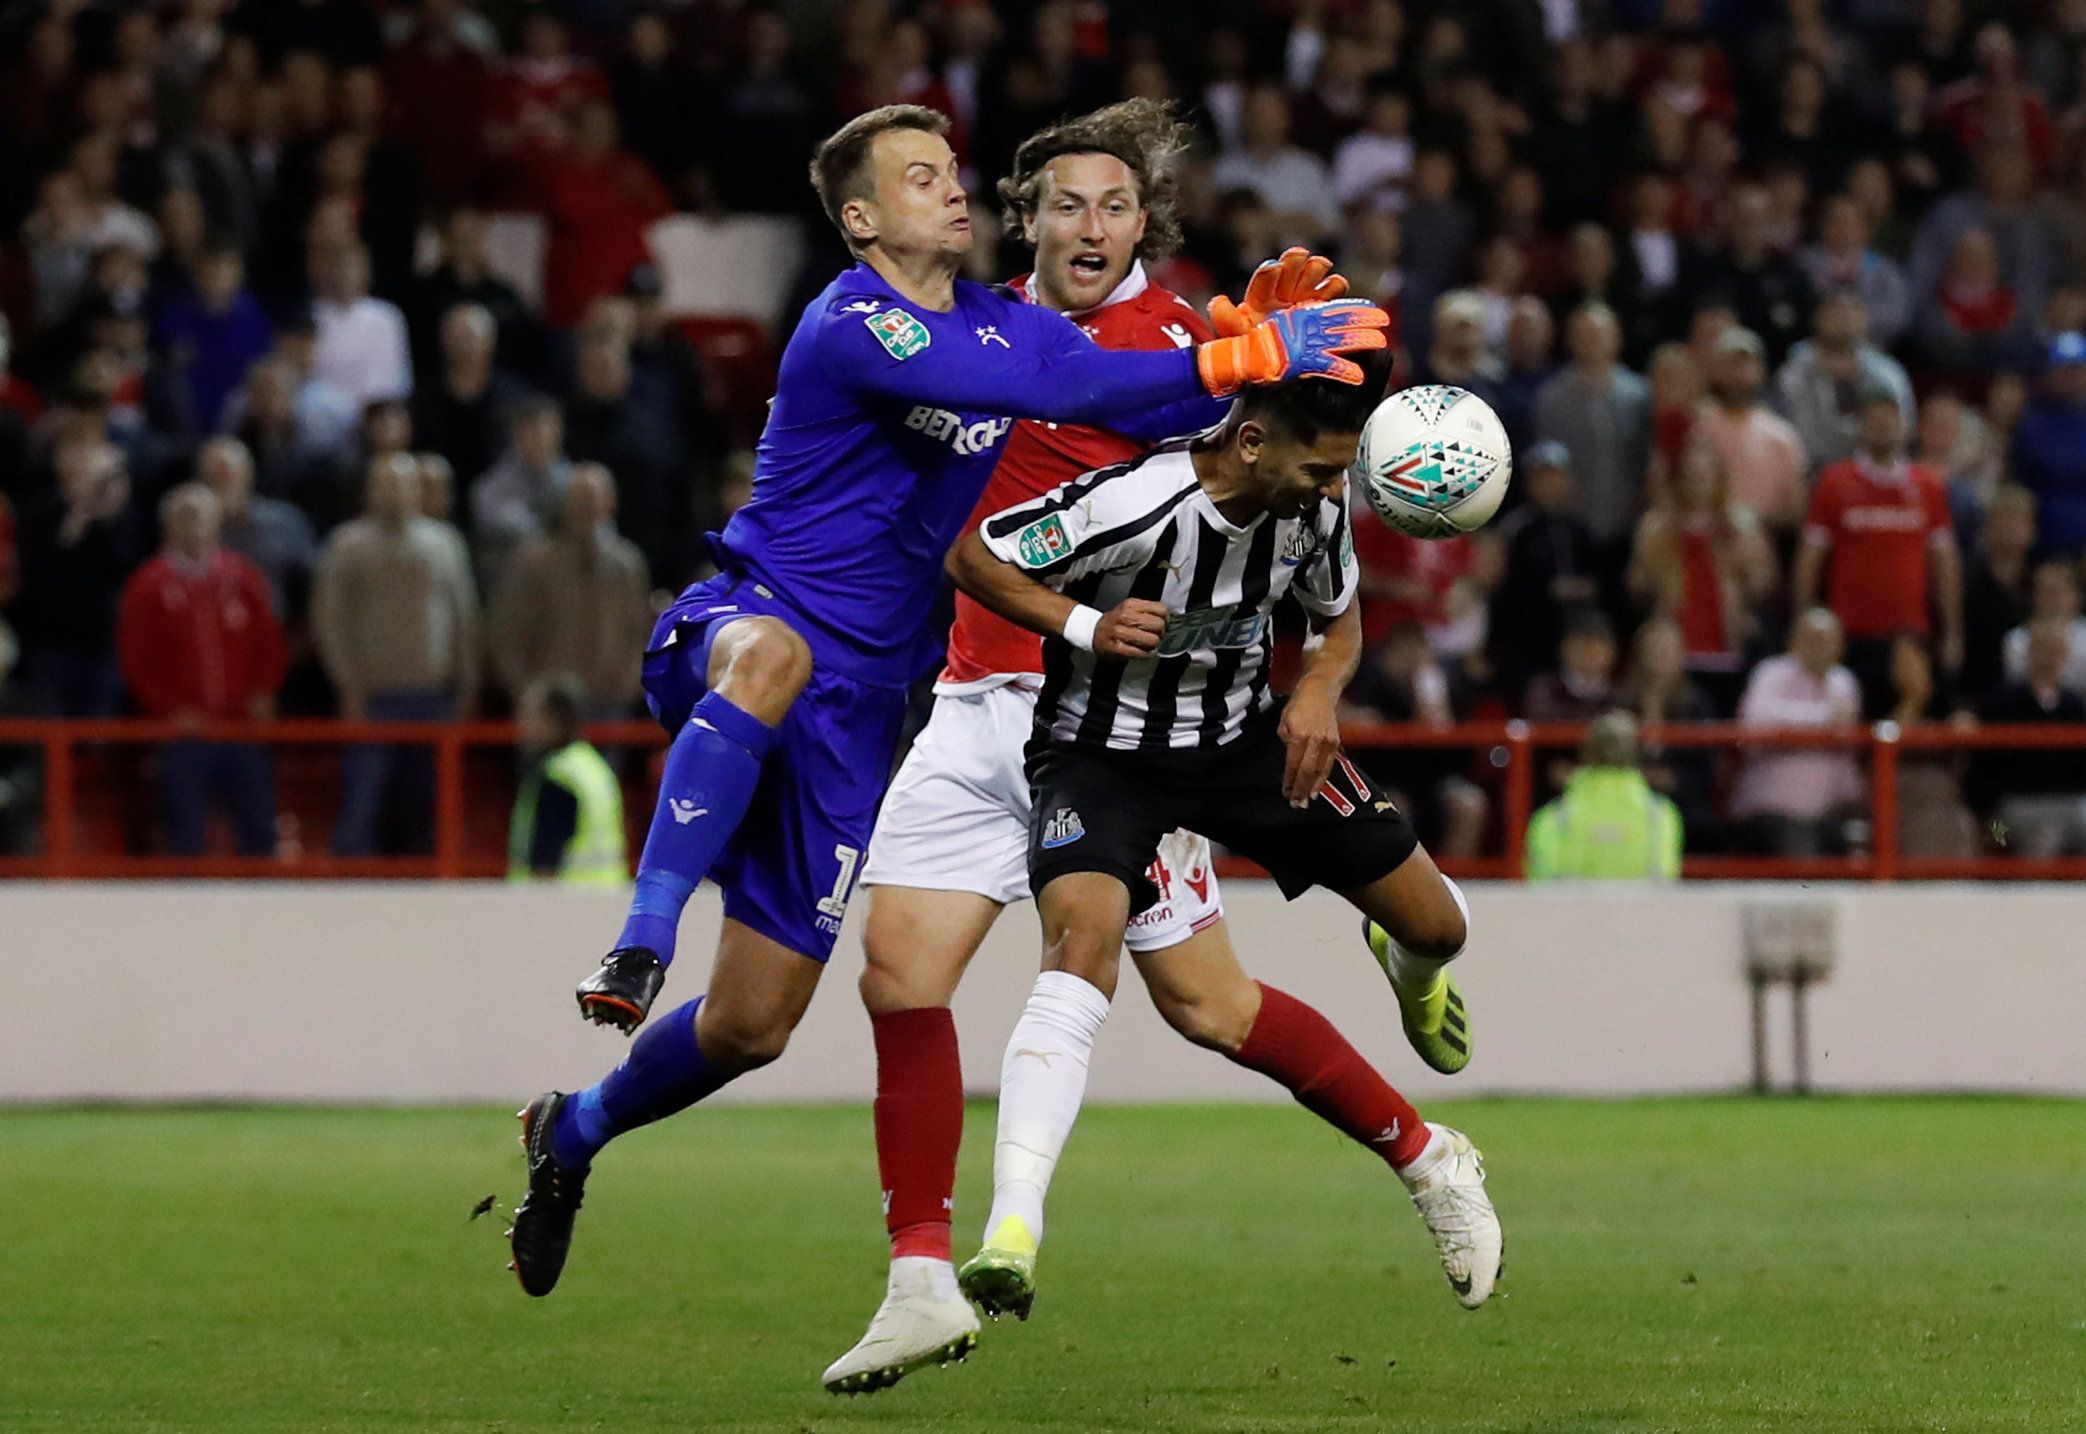 Soccer Football - Carabao Cup Second Round - Nottingham Forest v Newcastle United - The City Ground, Nottingham, Britain - August 29, 2018   Nottingham Forest's Luke Steele collides with Newcastle United's Ayoze Perez in the penalty area    Action Images via Reuters/Matthew Childs    EDITORIAL USE ONLY. No use with unauthorized audio, video, data, fixture lists, club/league logos or "live" services. Online in-match use limited to 75 images, no video emulation. No use in betting, games or single 